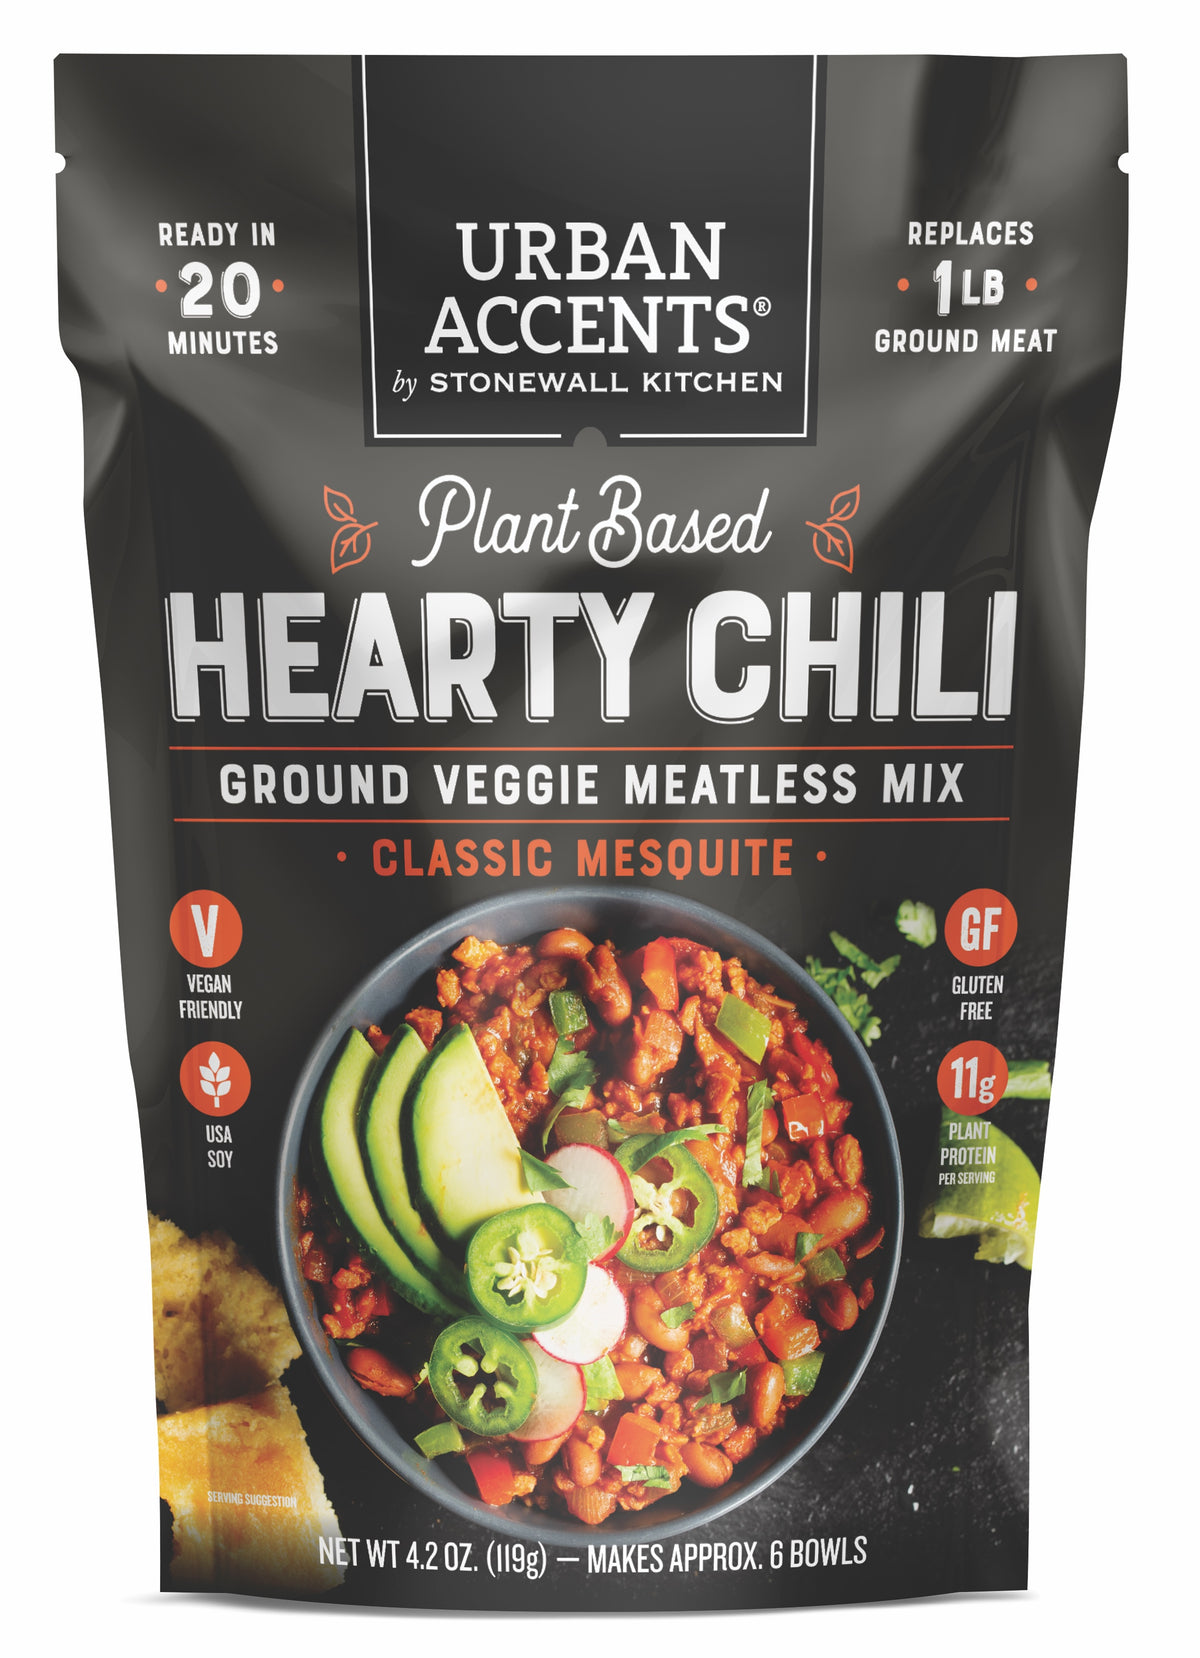 Hearty Chili Classic Mesquite Meatless Mix